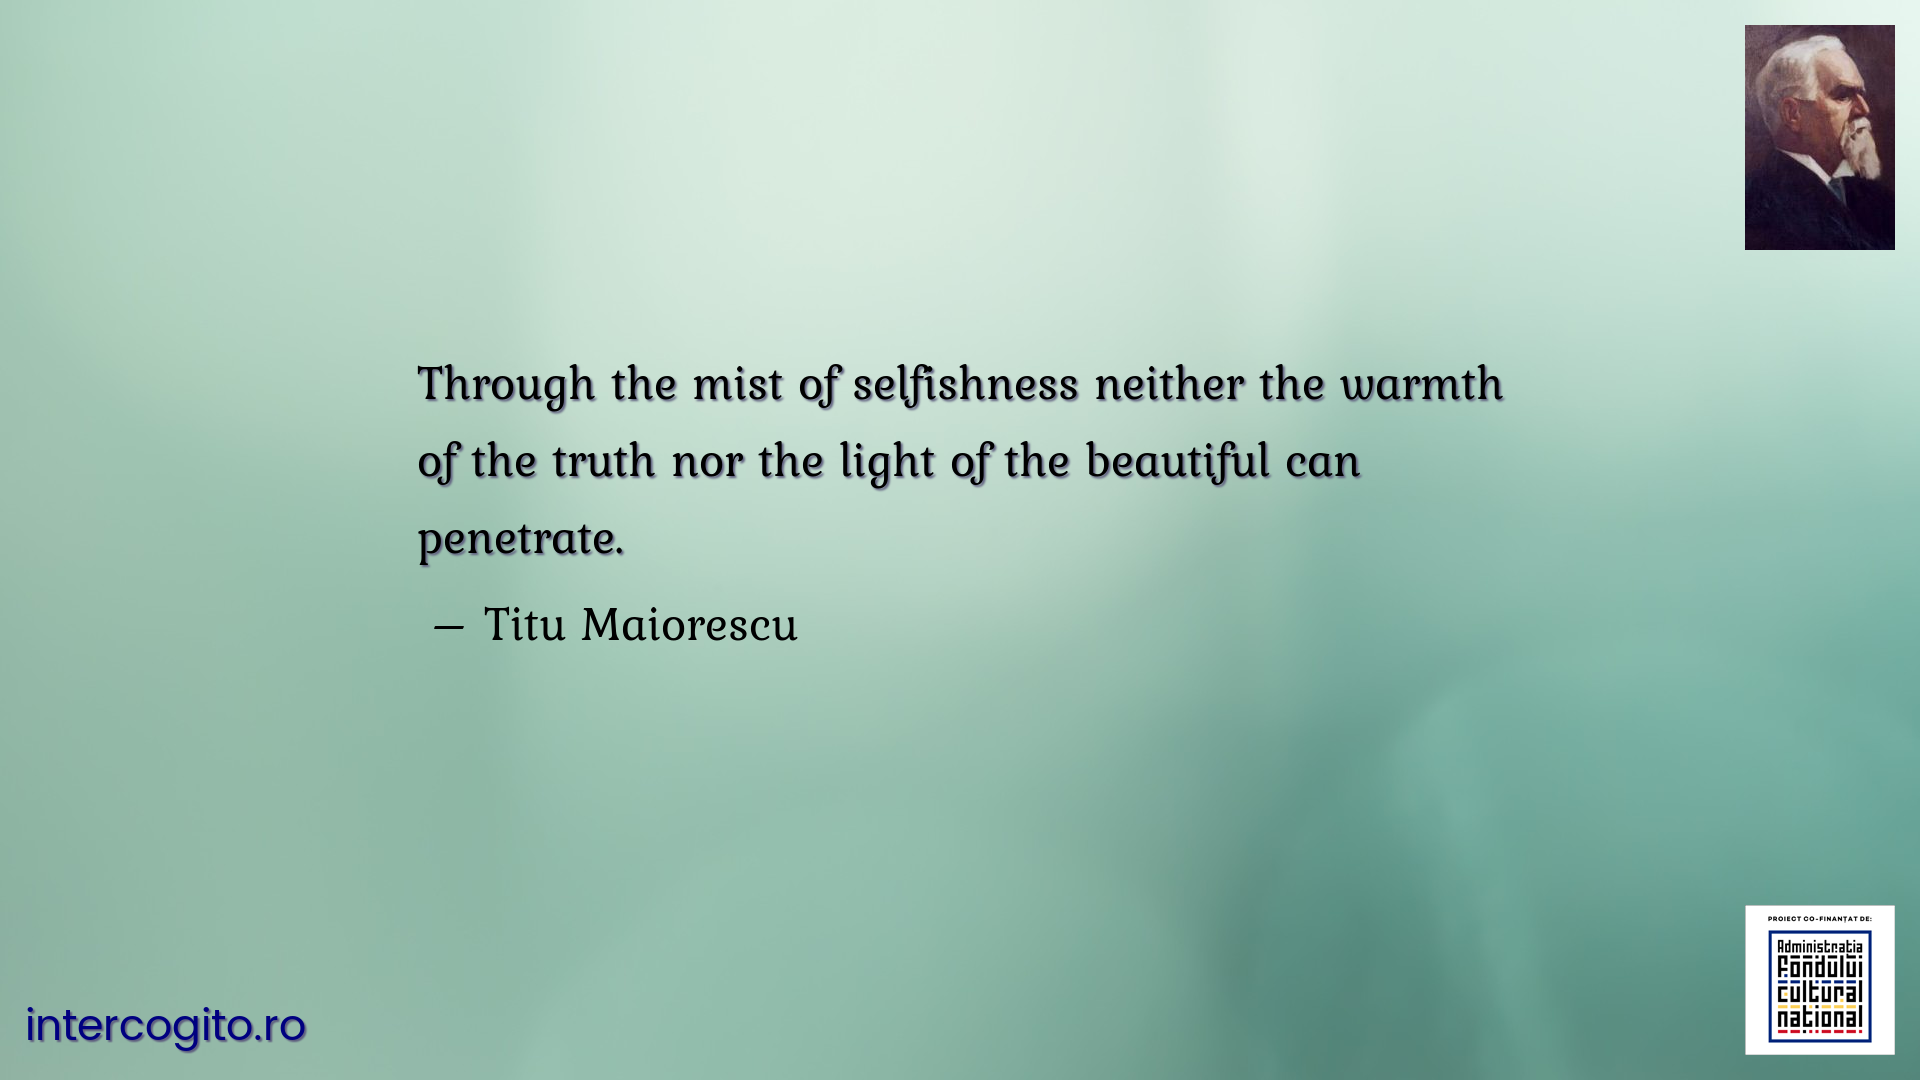 Through the mist of selfishness neither the warmth of the truth nor the light of the beautiful can penetrate.